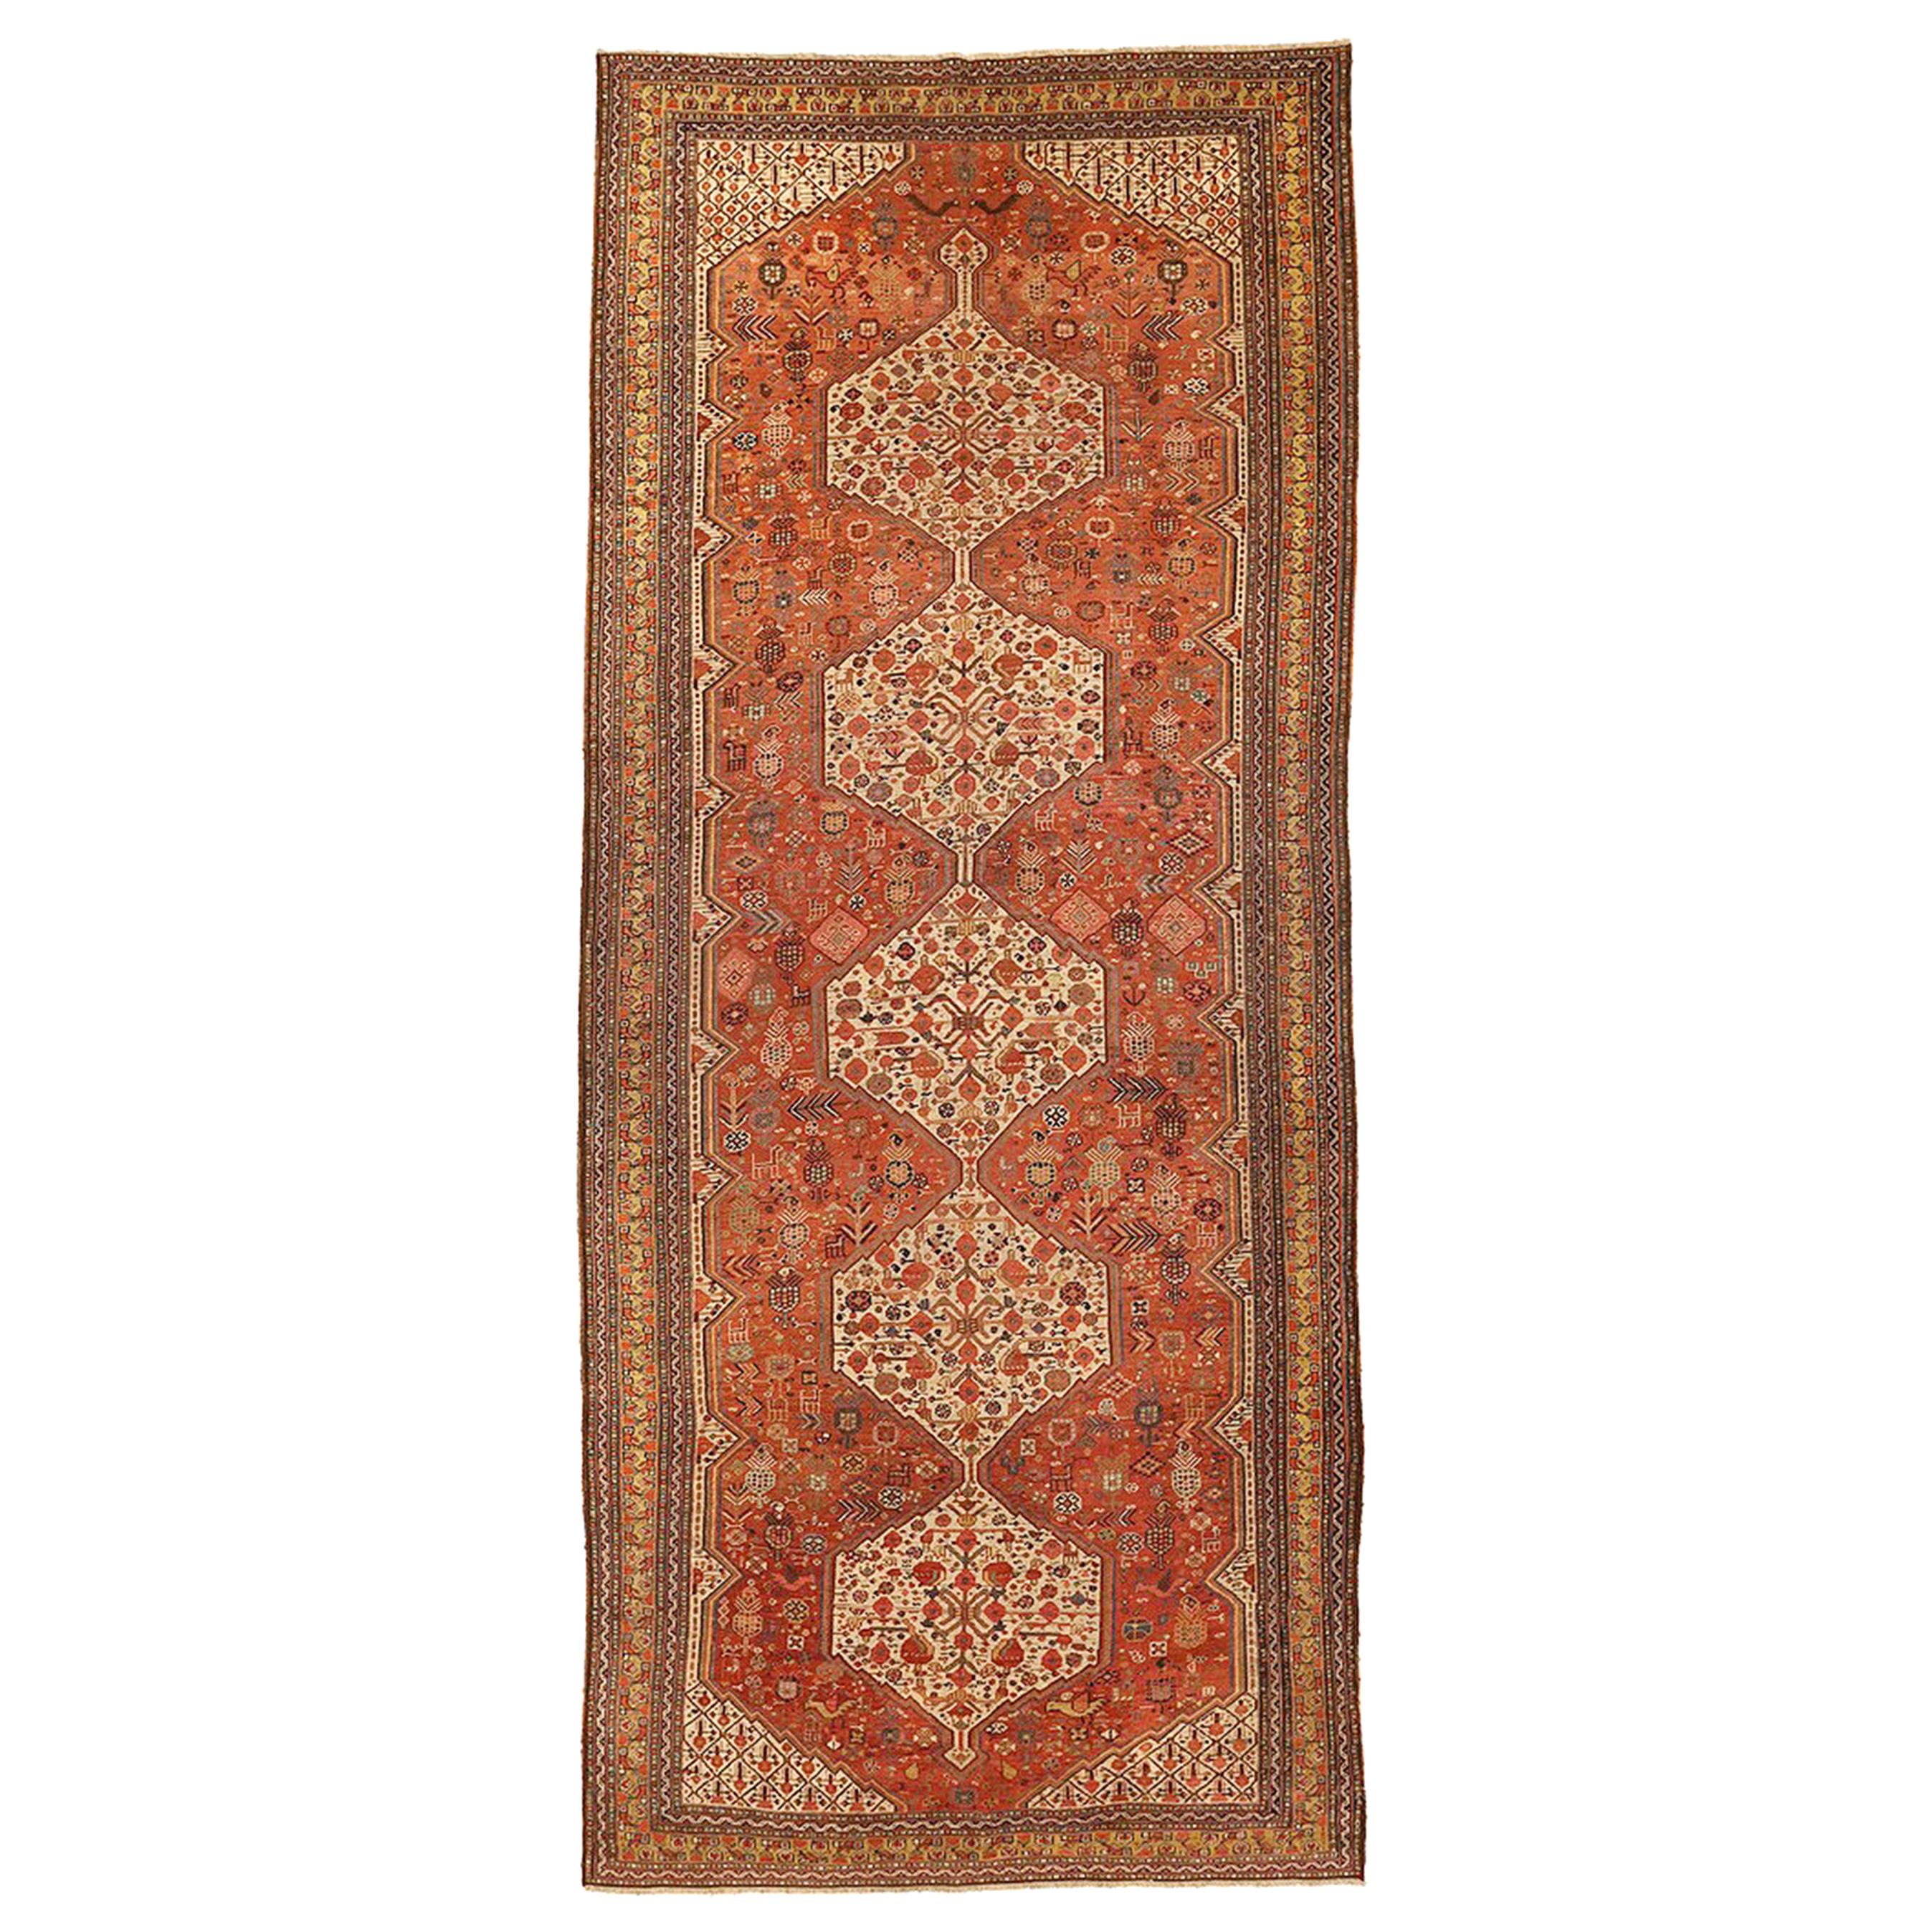 Antique Persian Shiraz Rug with Ivory Floral Medallions on Orange & Beige Field For Sale